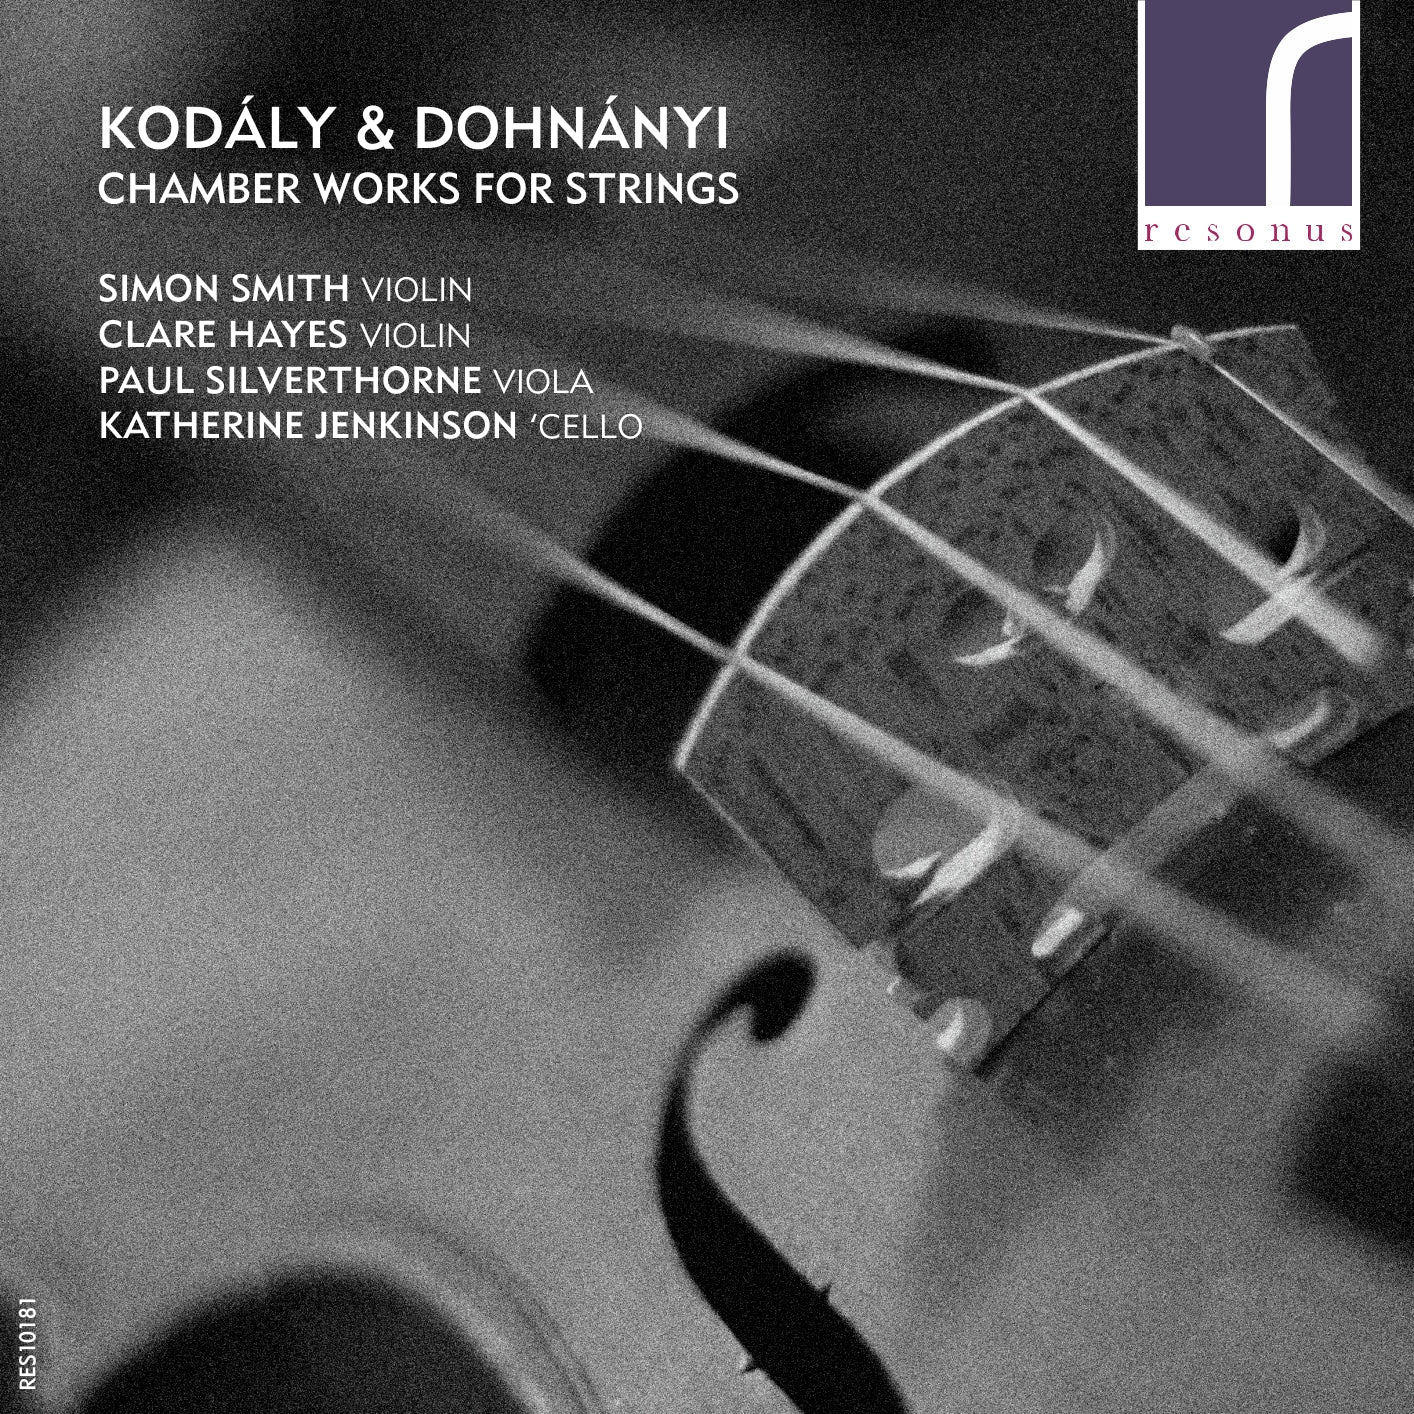 Kodály & Dohnányi: Chamber Works for Strings